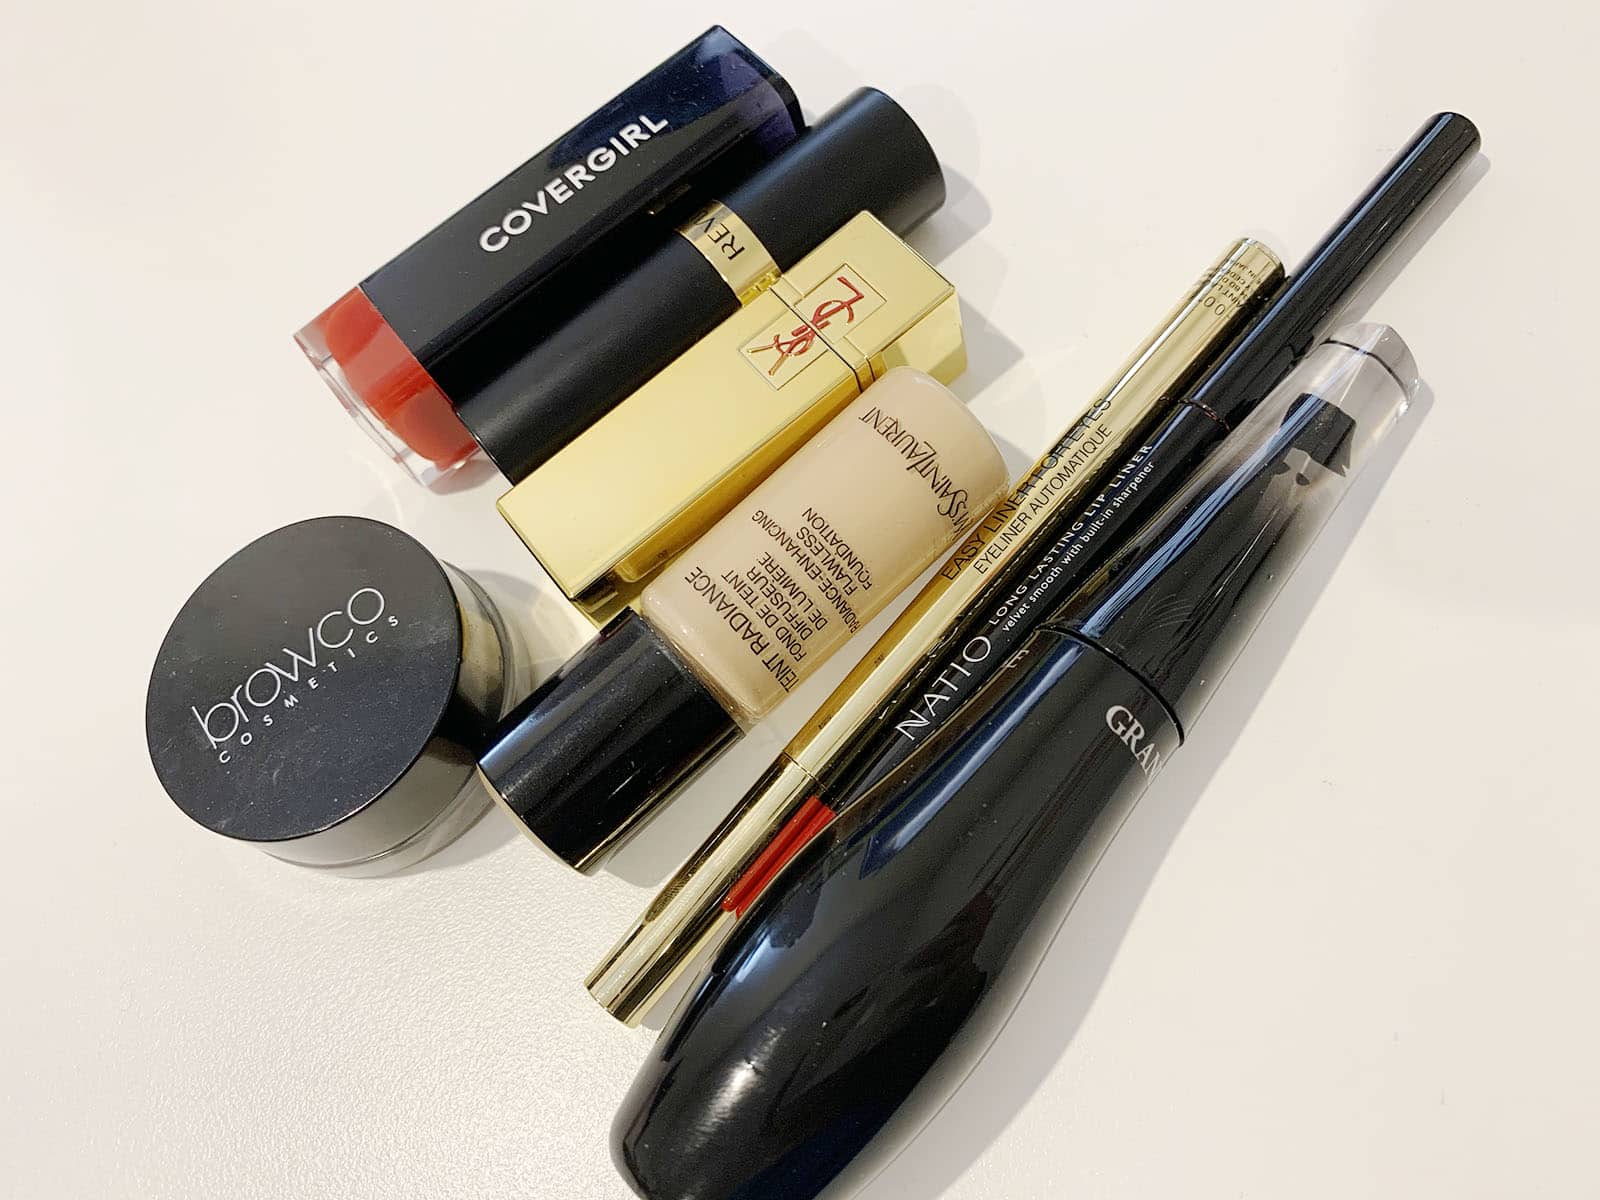 A handful of makeup products on a white surface